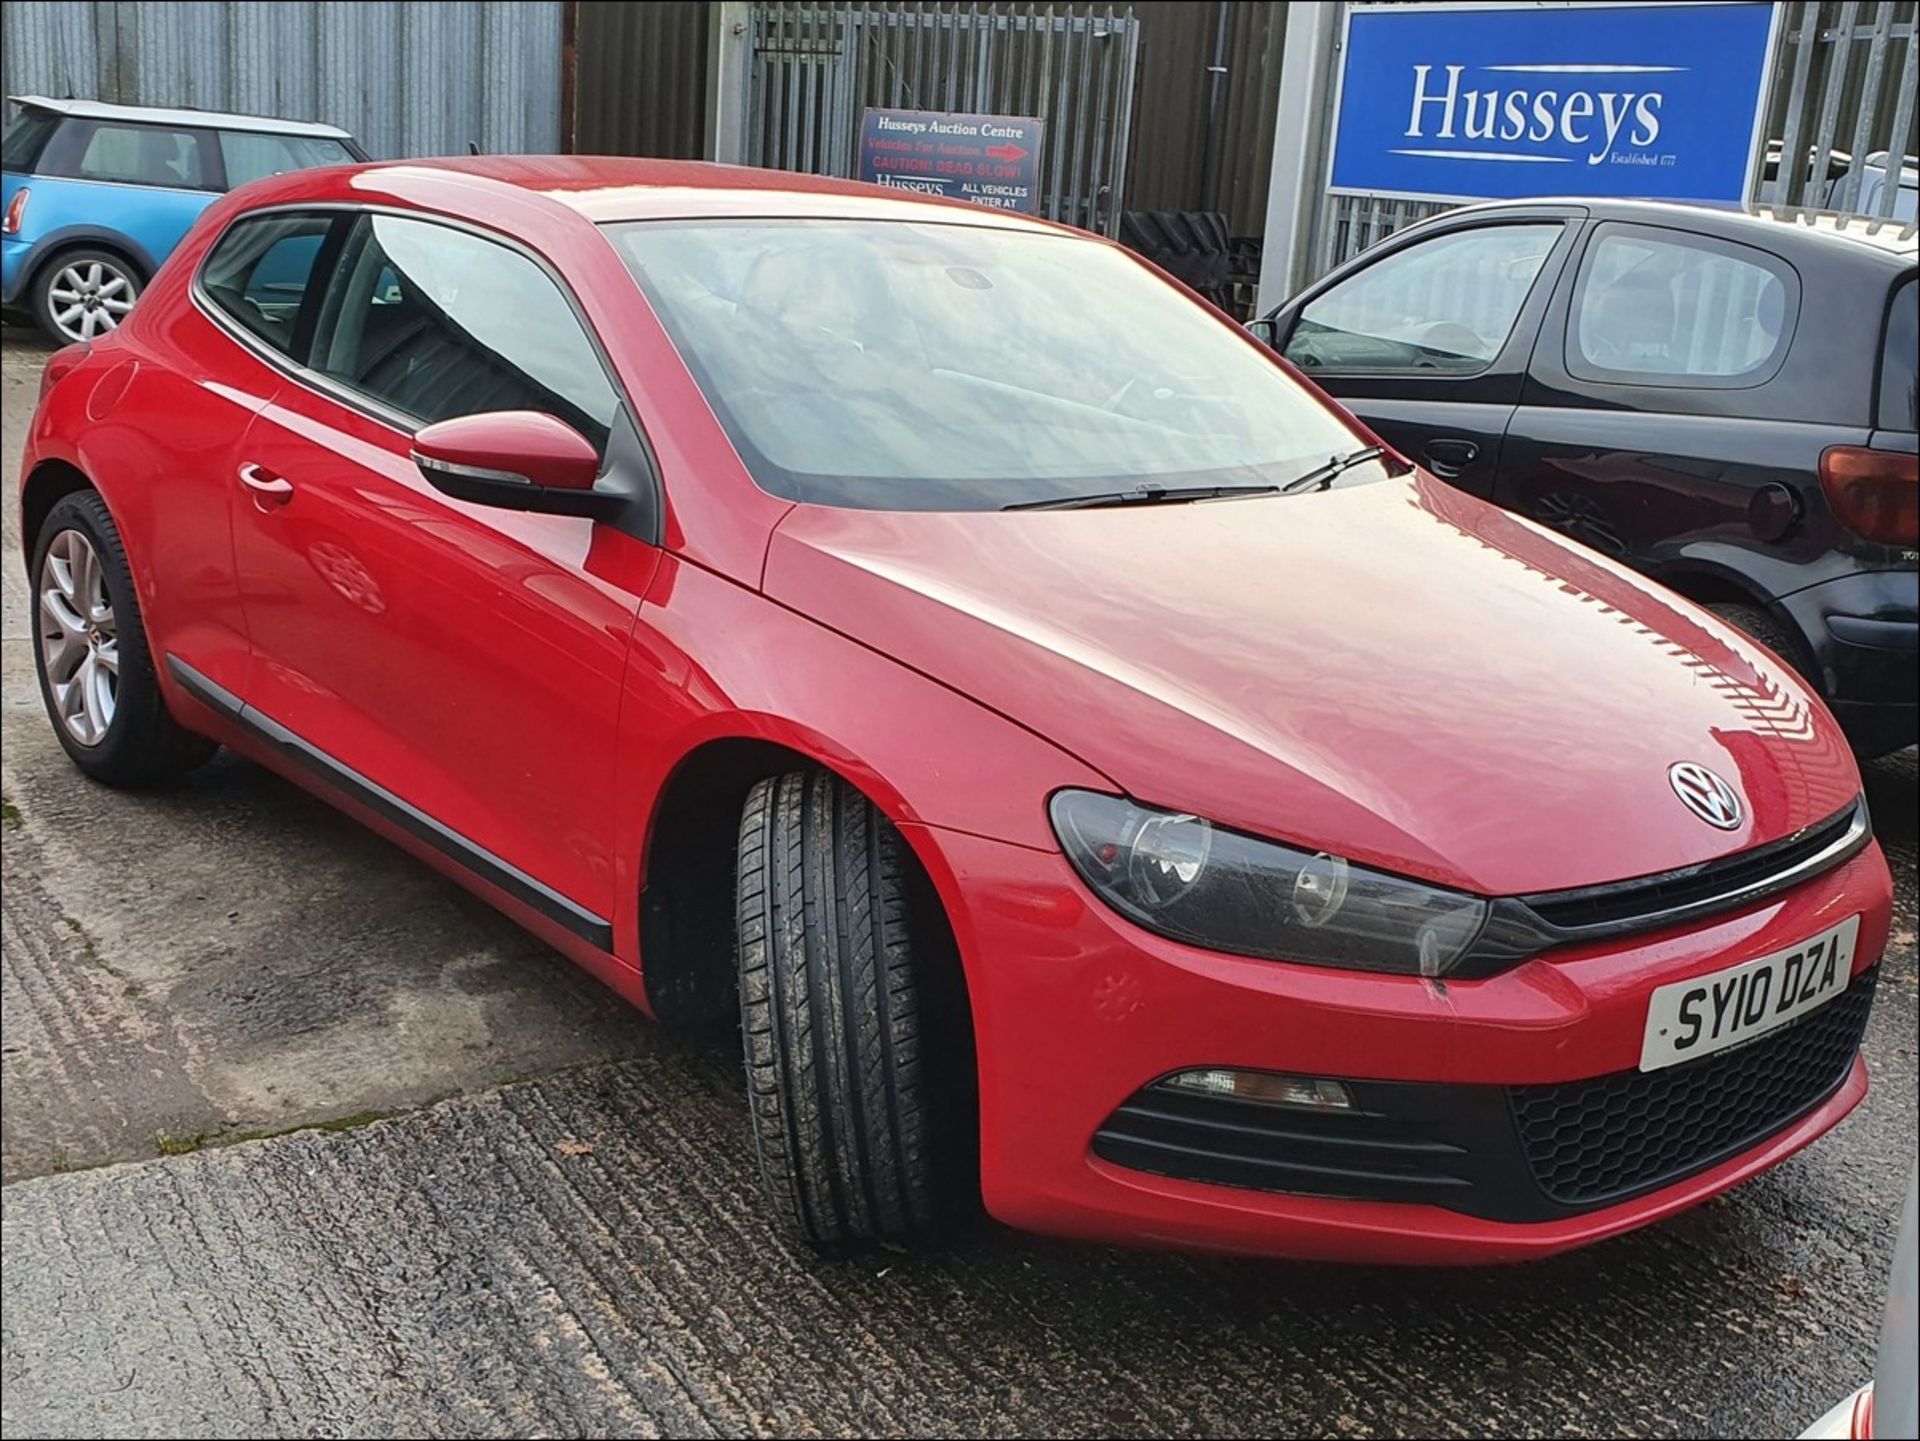 10/10 VOLKSWAGEN SCIROCCO TSI - 1390cc 2dr Coupe (Red, 107k)